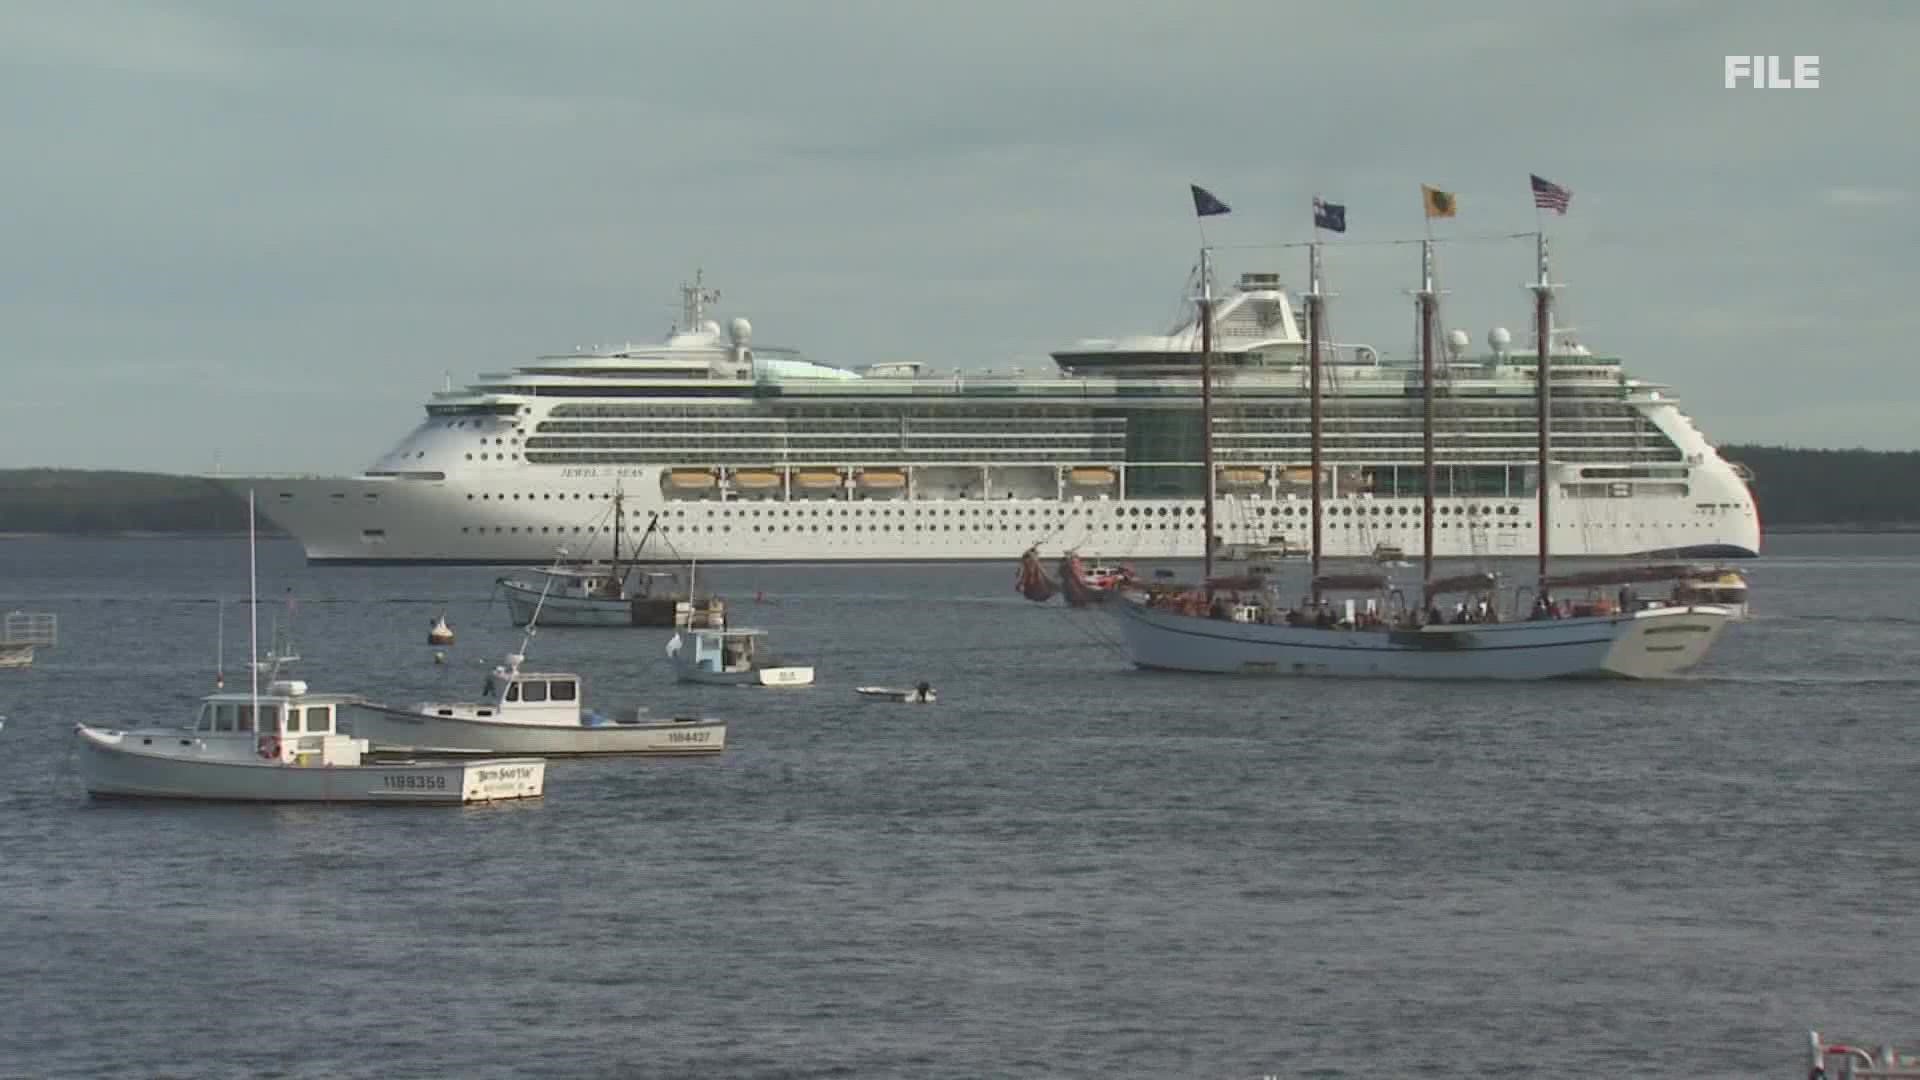 The ordinance restricts cruise ships from allowing more than 1,000 people off the ship per day.